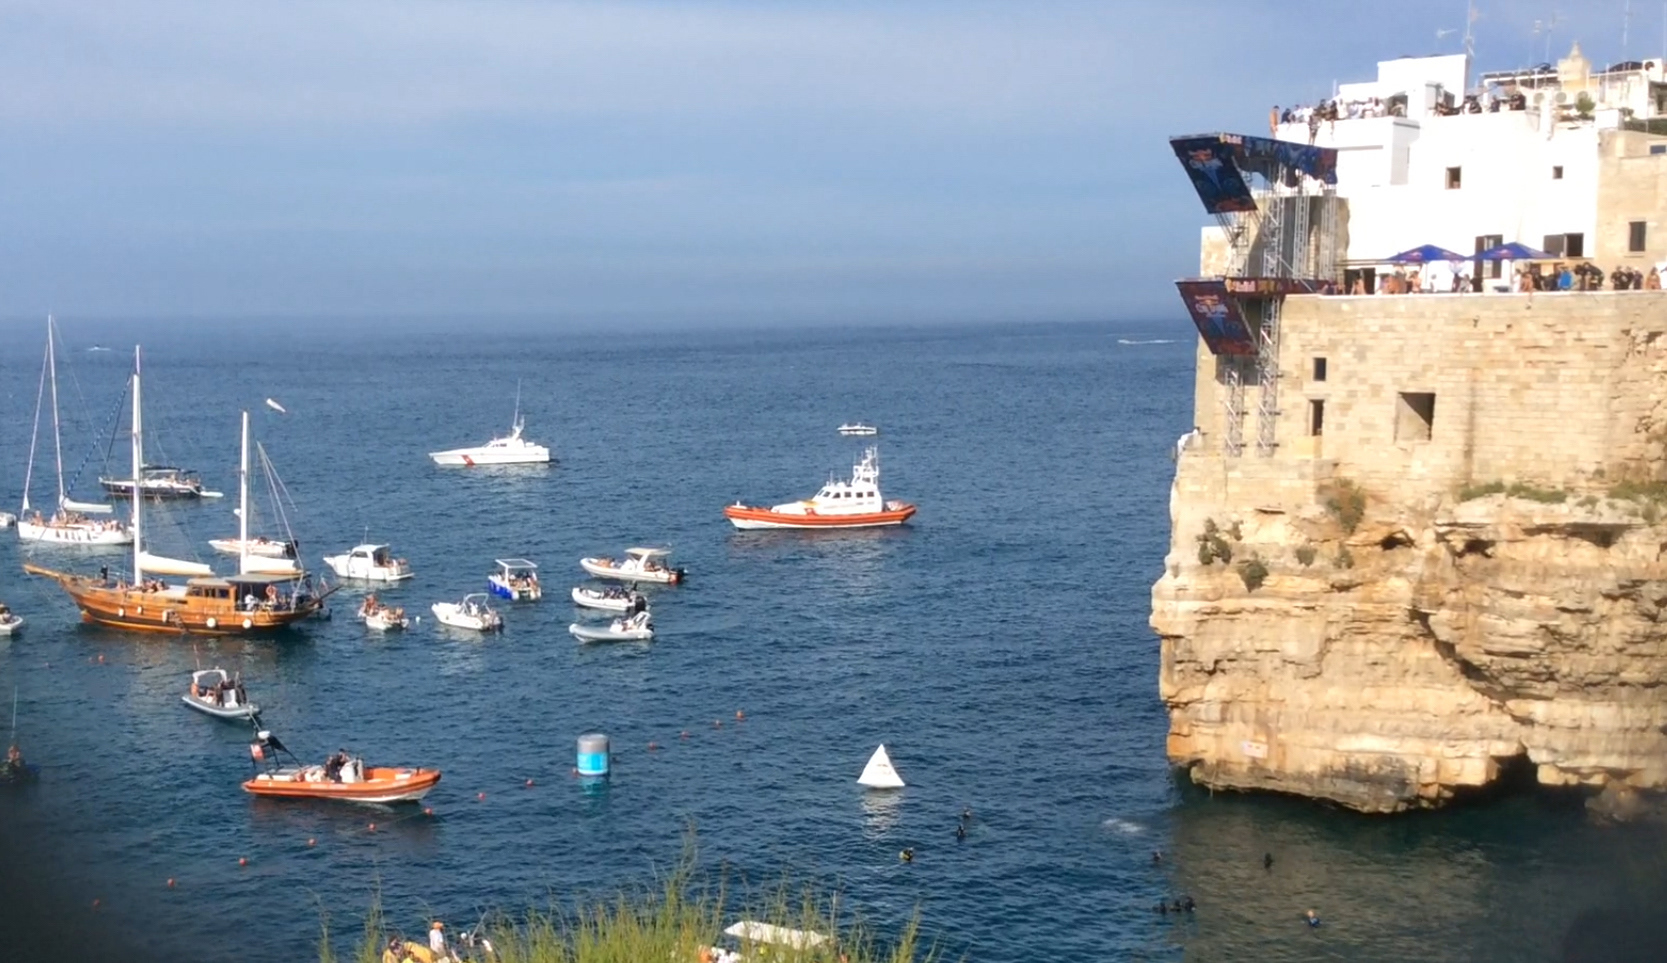 cylinder rulle Viva andrea guerriero action photography - Red Bull Cliff Diving Polignano 2019